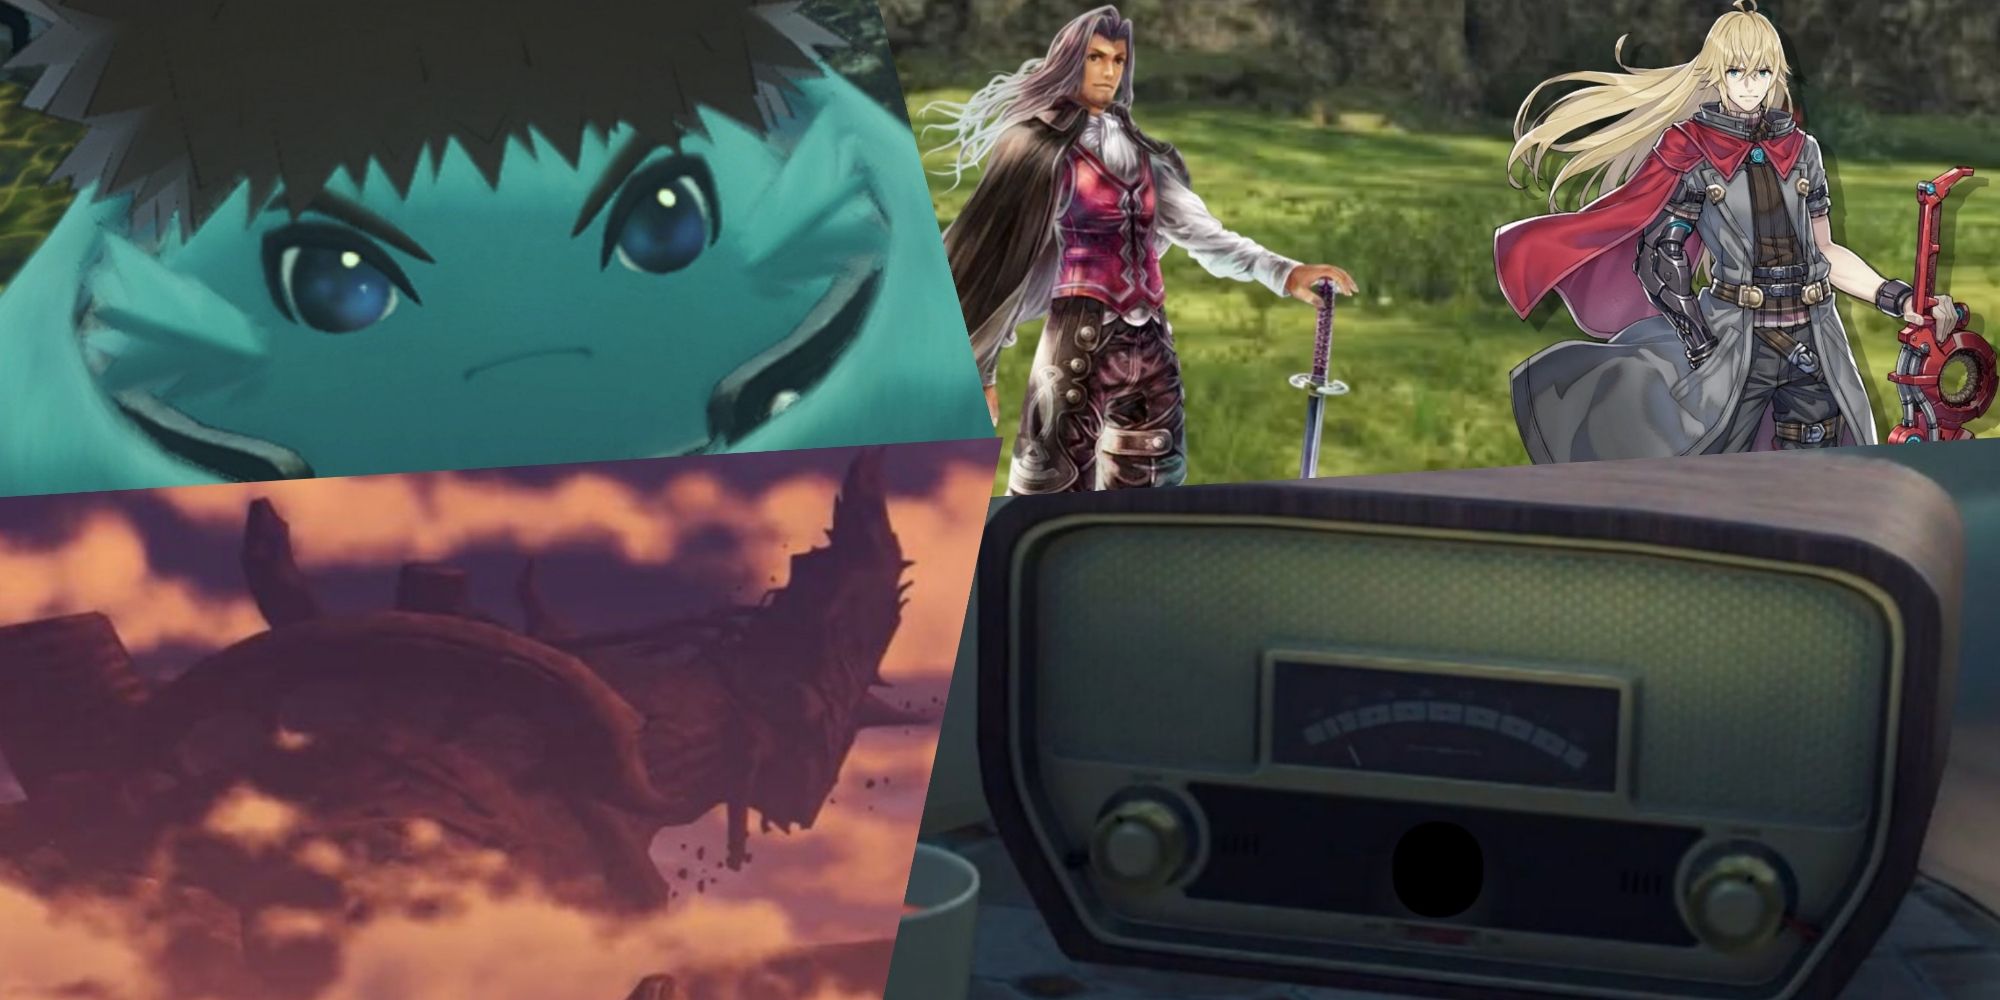 Xenoblade Chronicles 3: Future Redeemed - 10 Secrets You Probably Missed